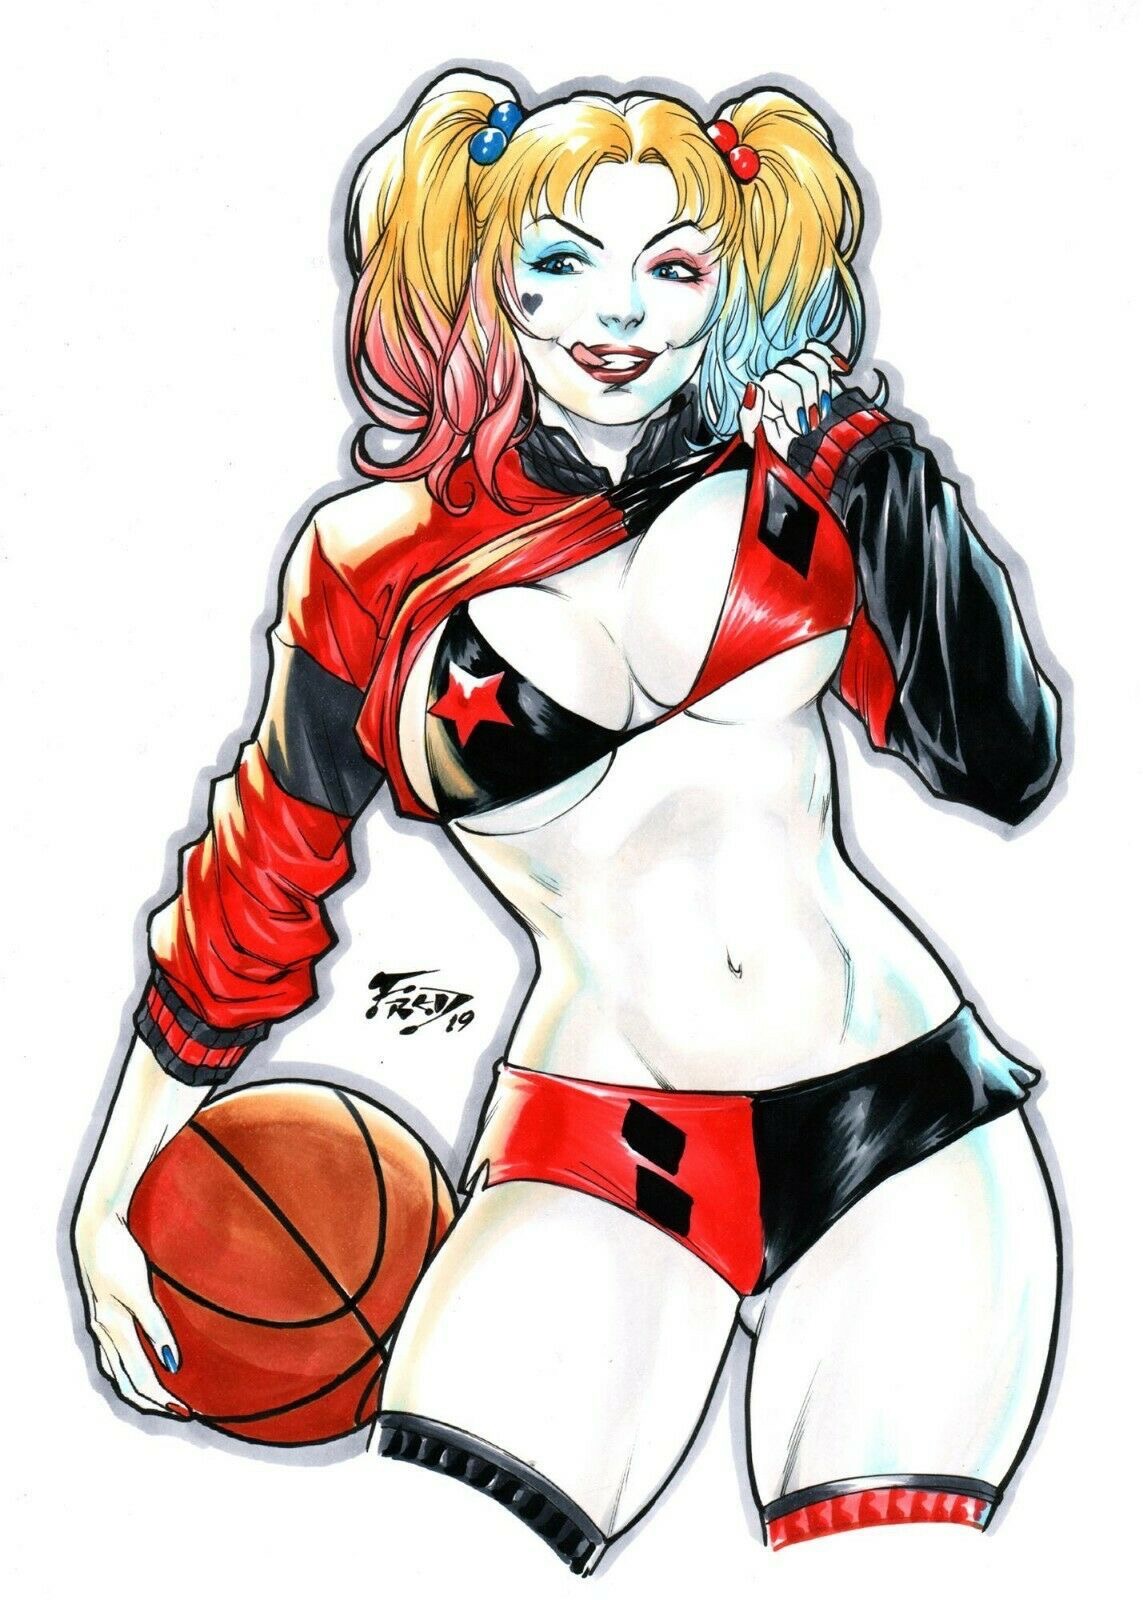 The less Harley wears, the better. 